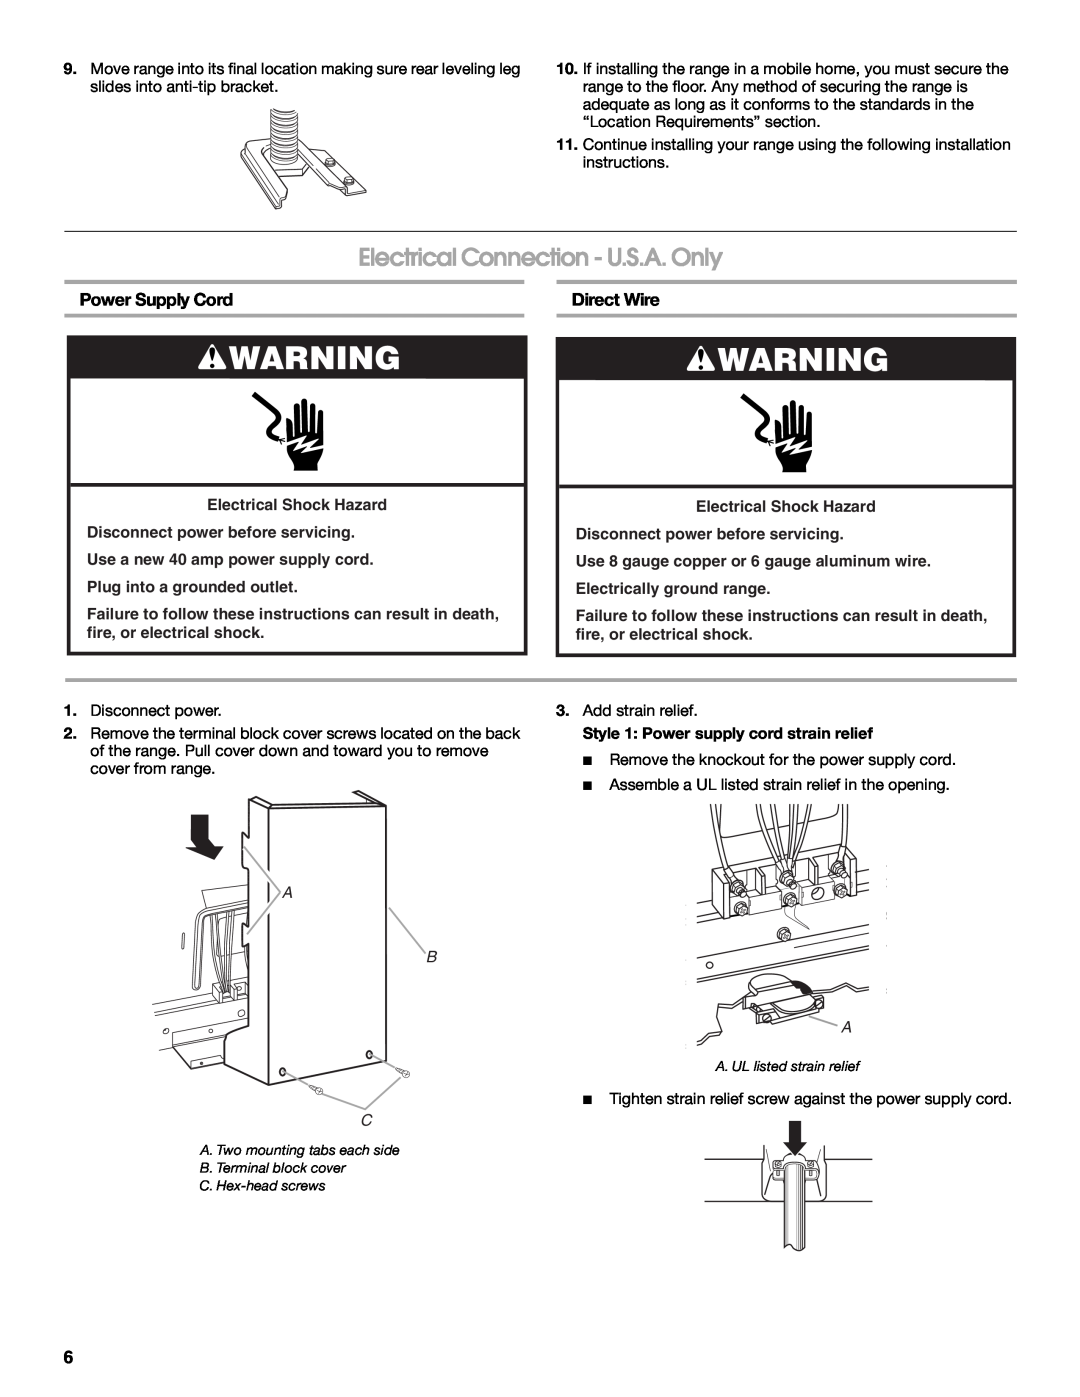 Amana W10196158B installation instructions Electrical Connection - U.S.A. Only, Power Supply Cord, Direct Wire, A B A 